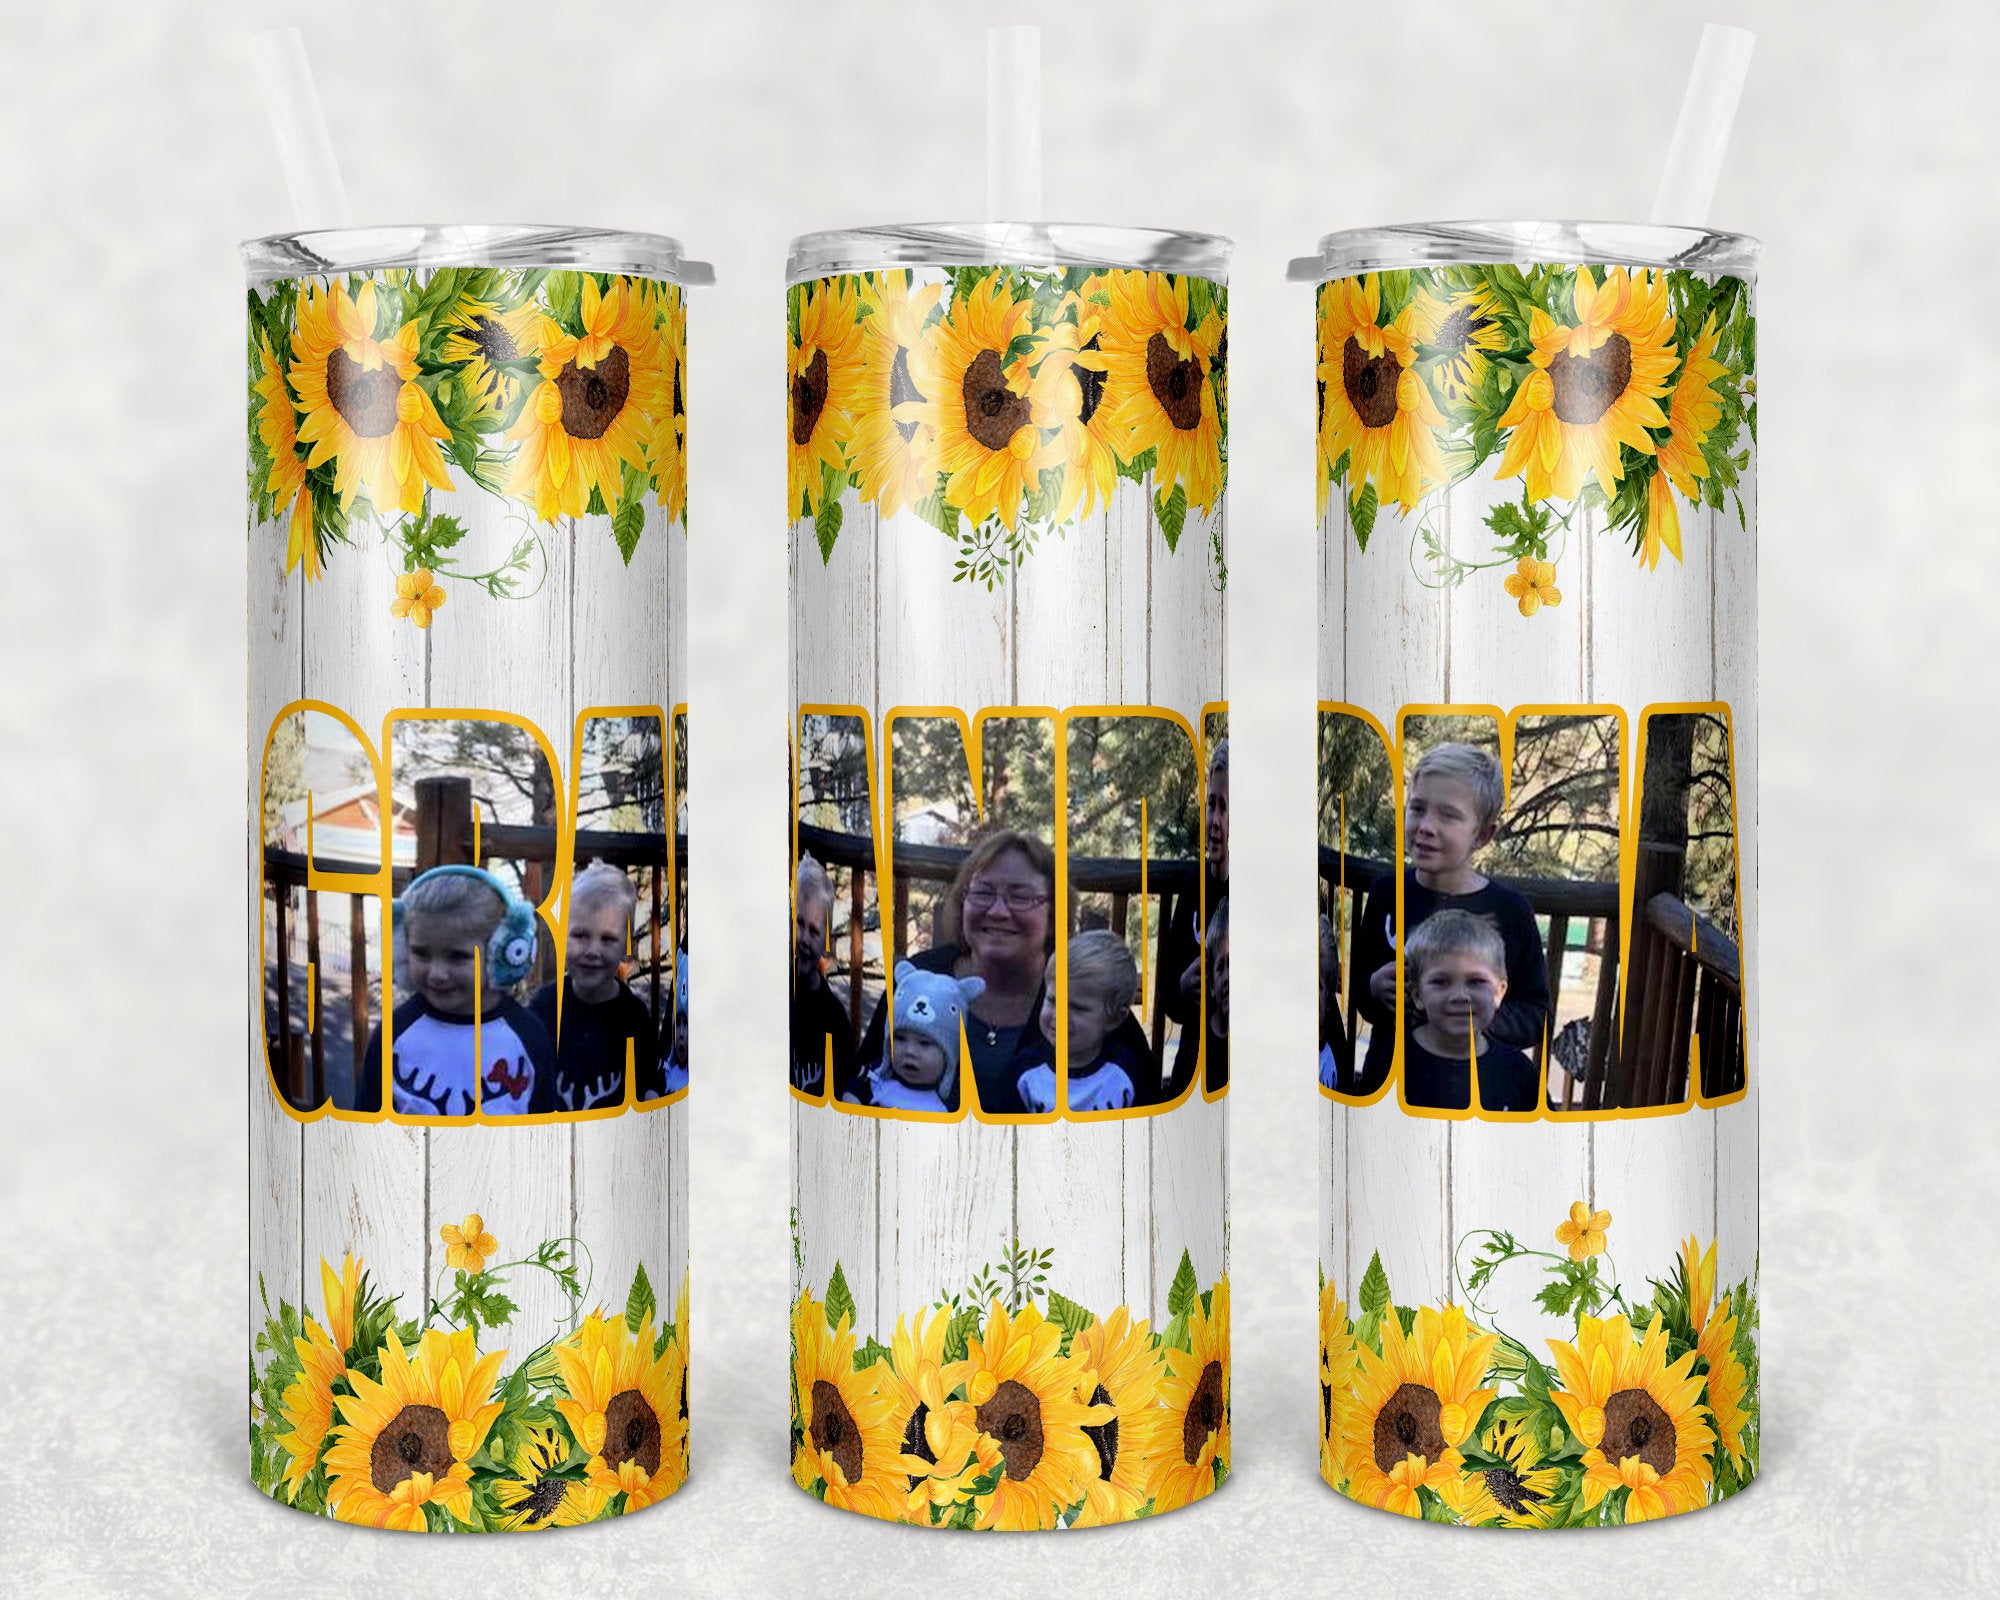 20 Oz Skinny Tumbler Picture Frame Rustic Wood Sunflower Grandma Photo Space Personalized Design Mothers Day